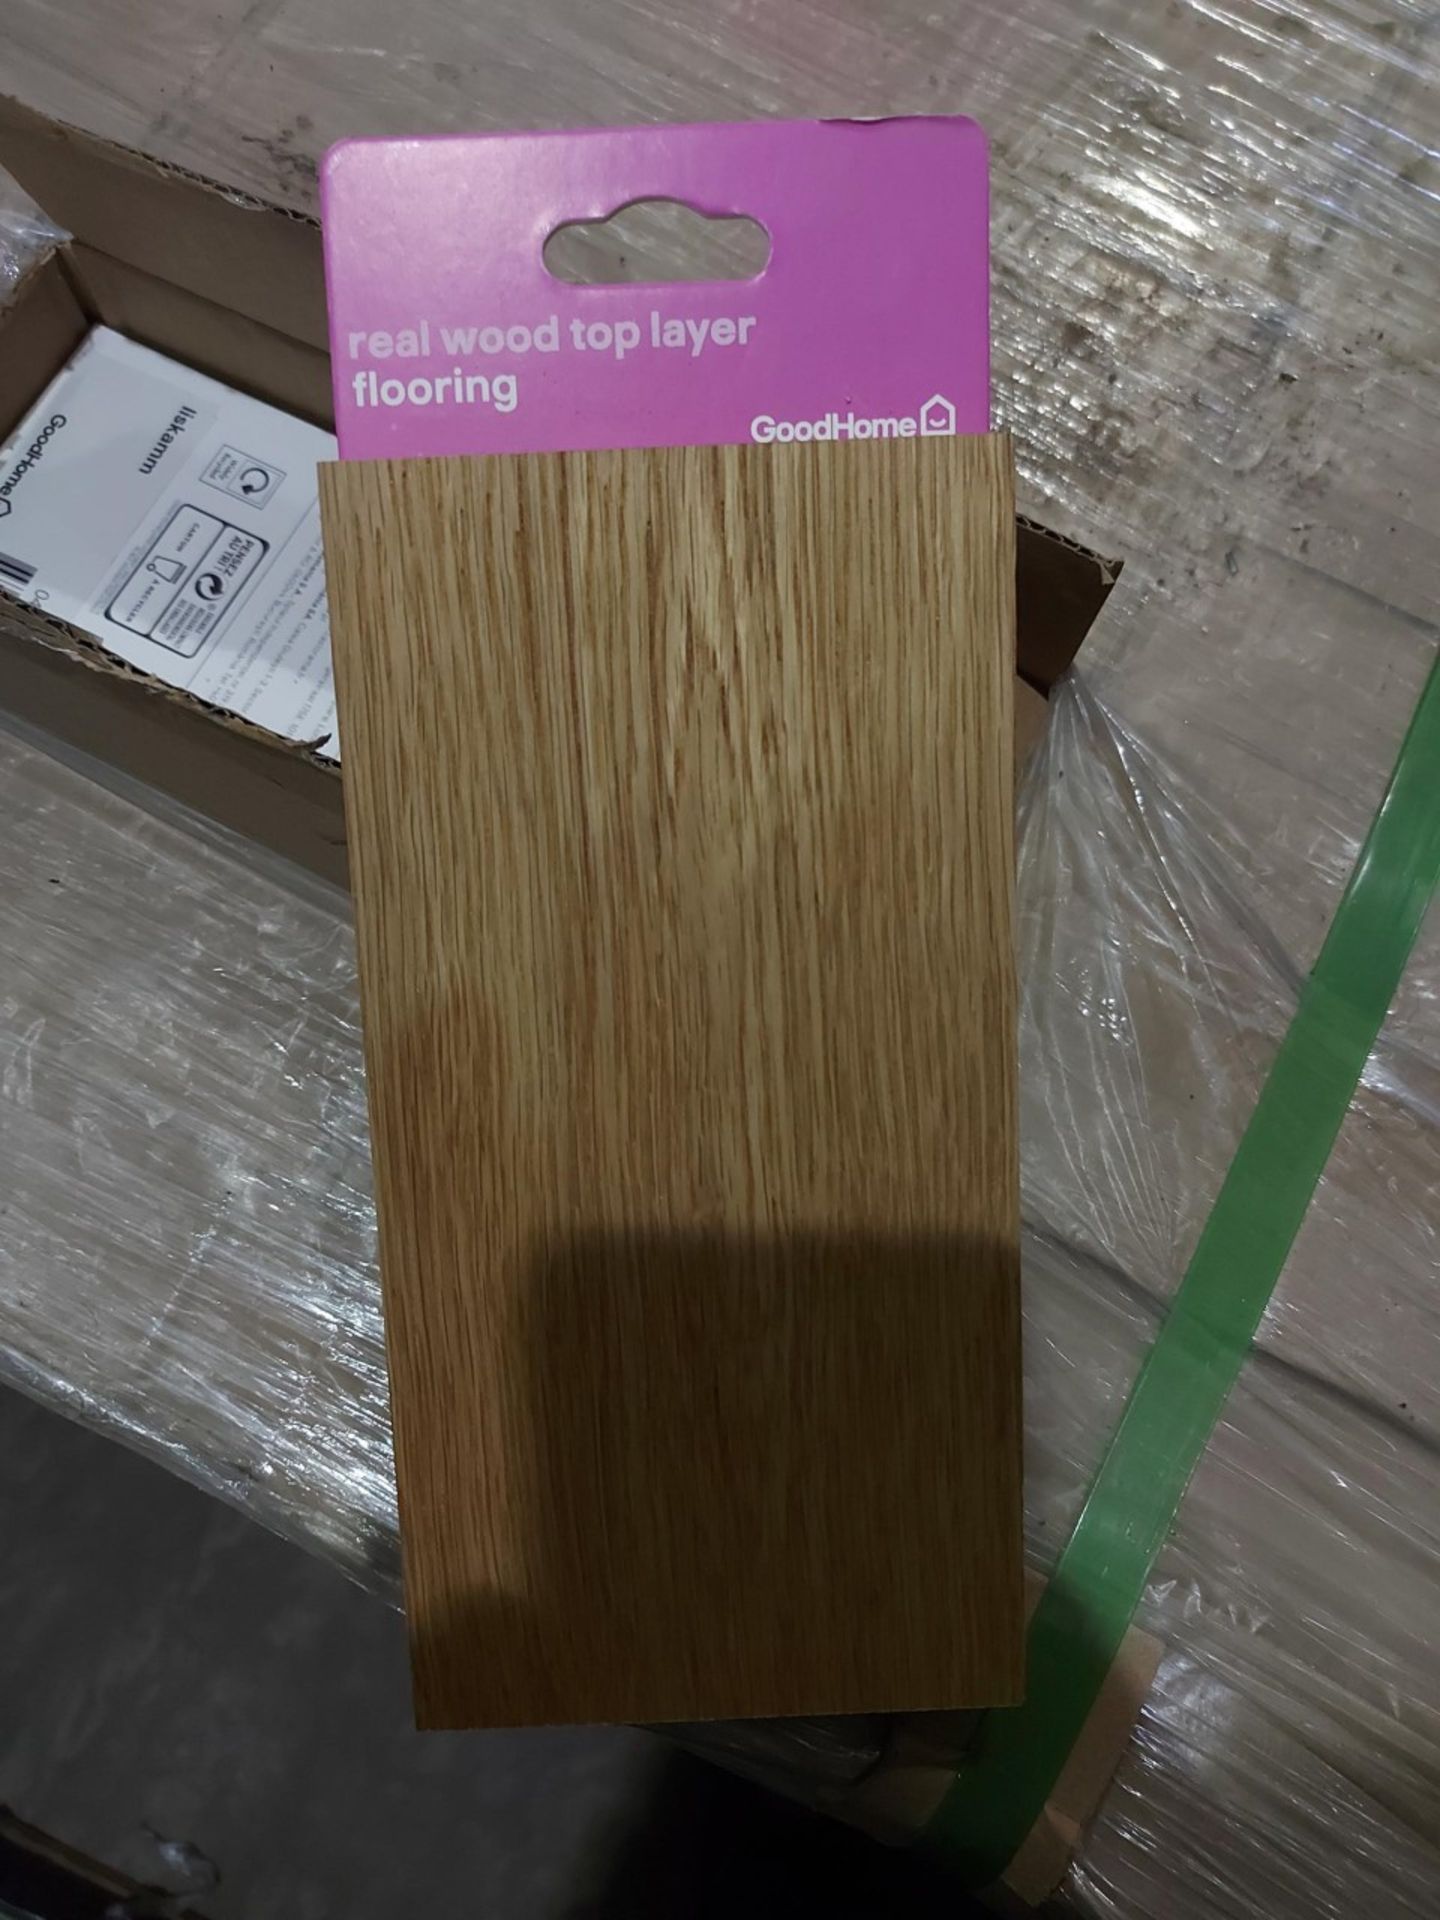 (Z258) PALLET TO CONTAIN 1,080 X LISKAMM REAL WOOD TOP LAYER FLOORING PIECES